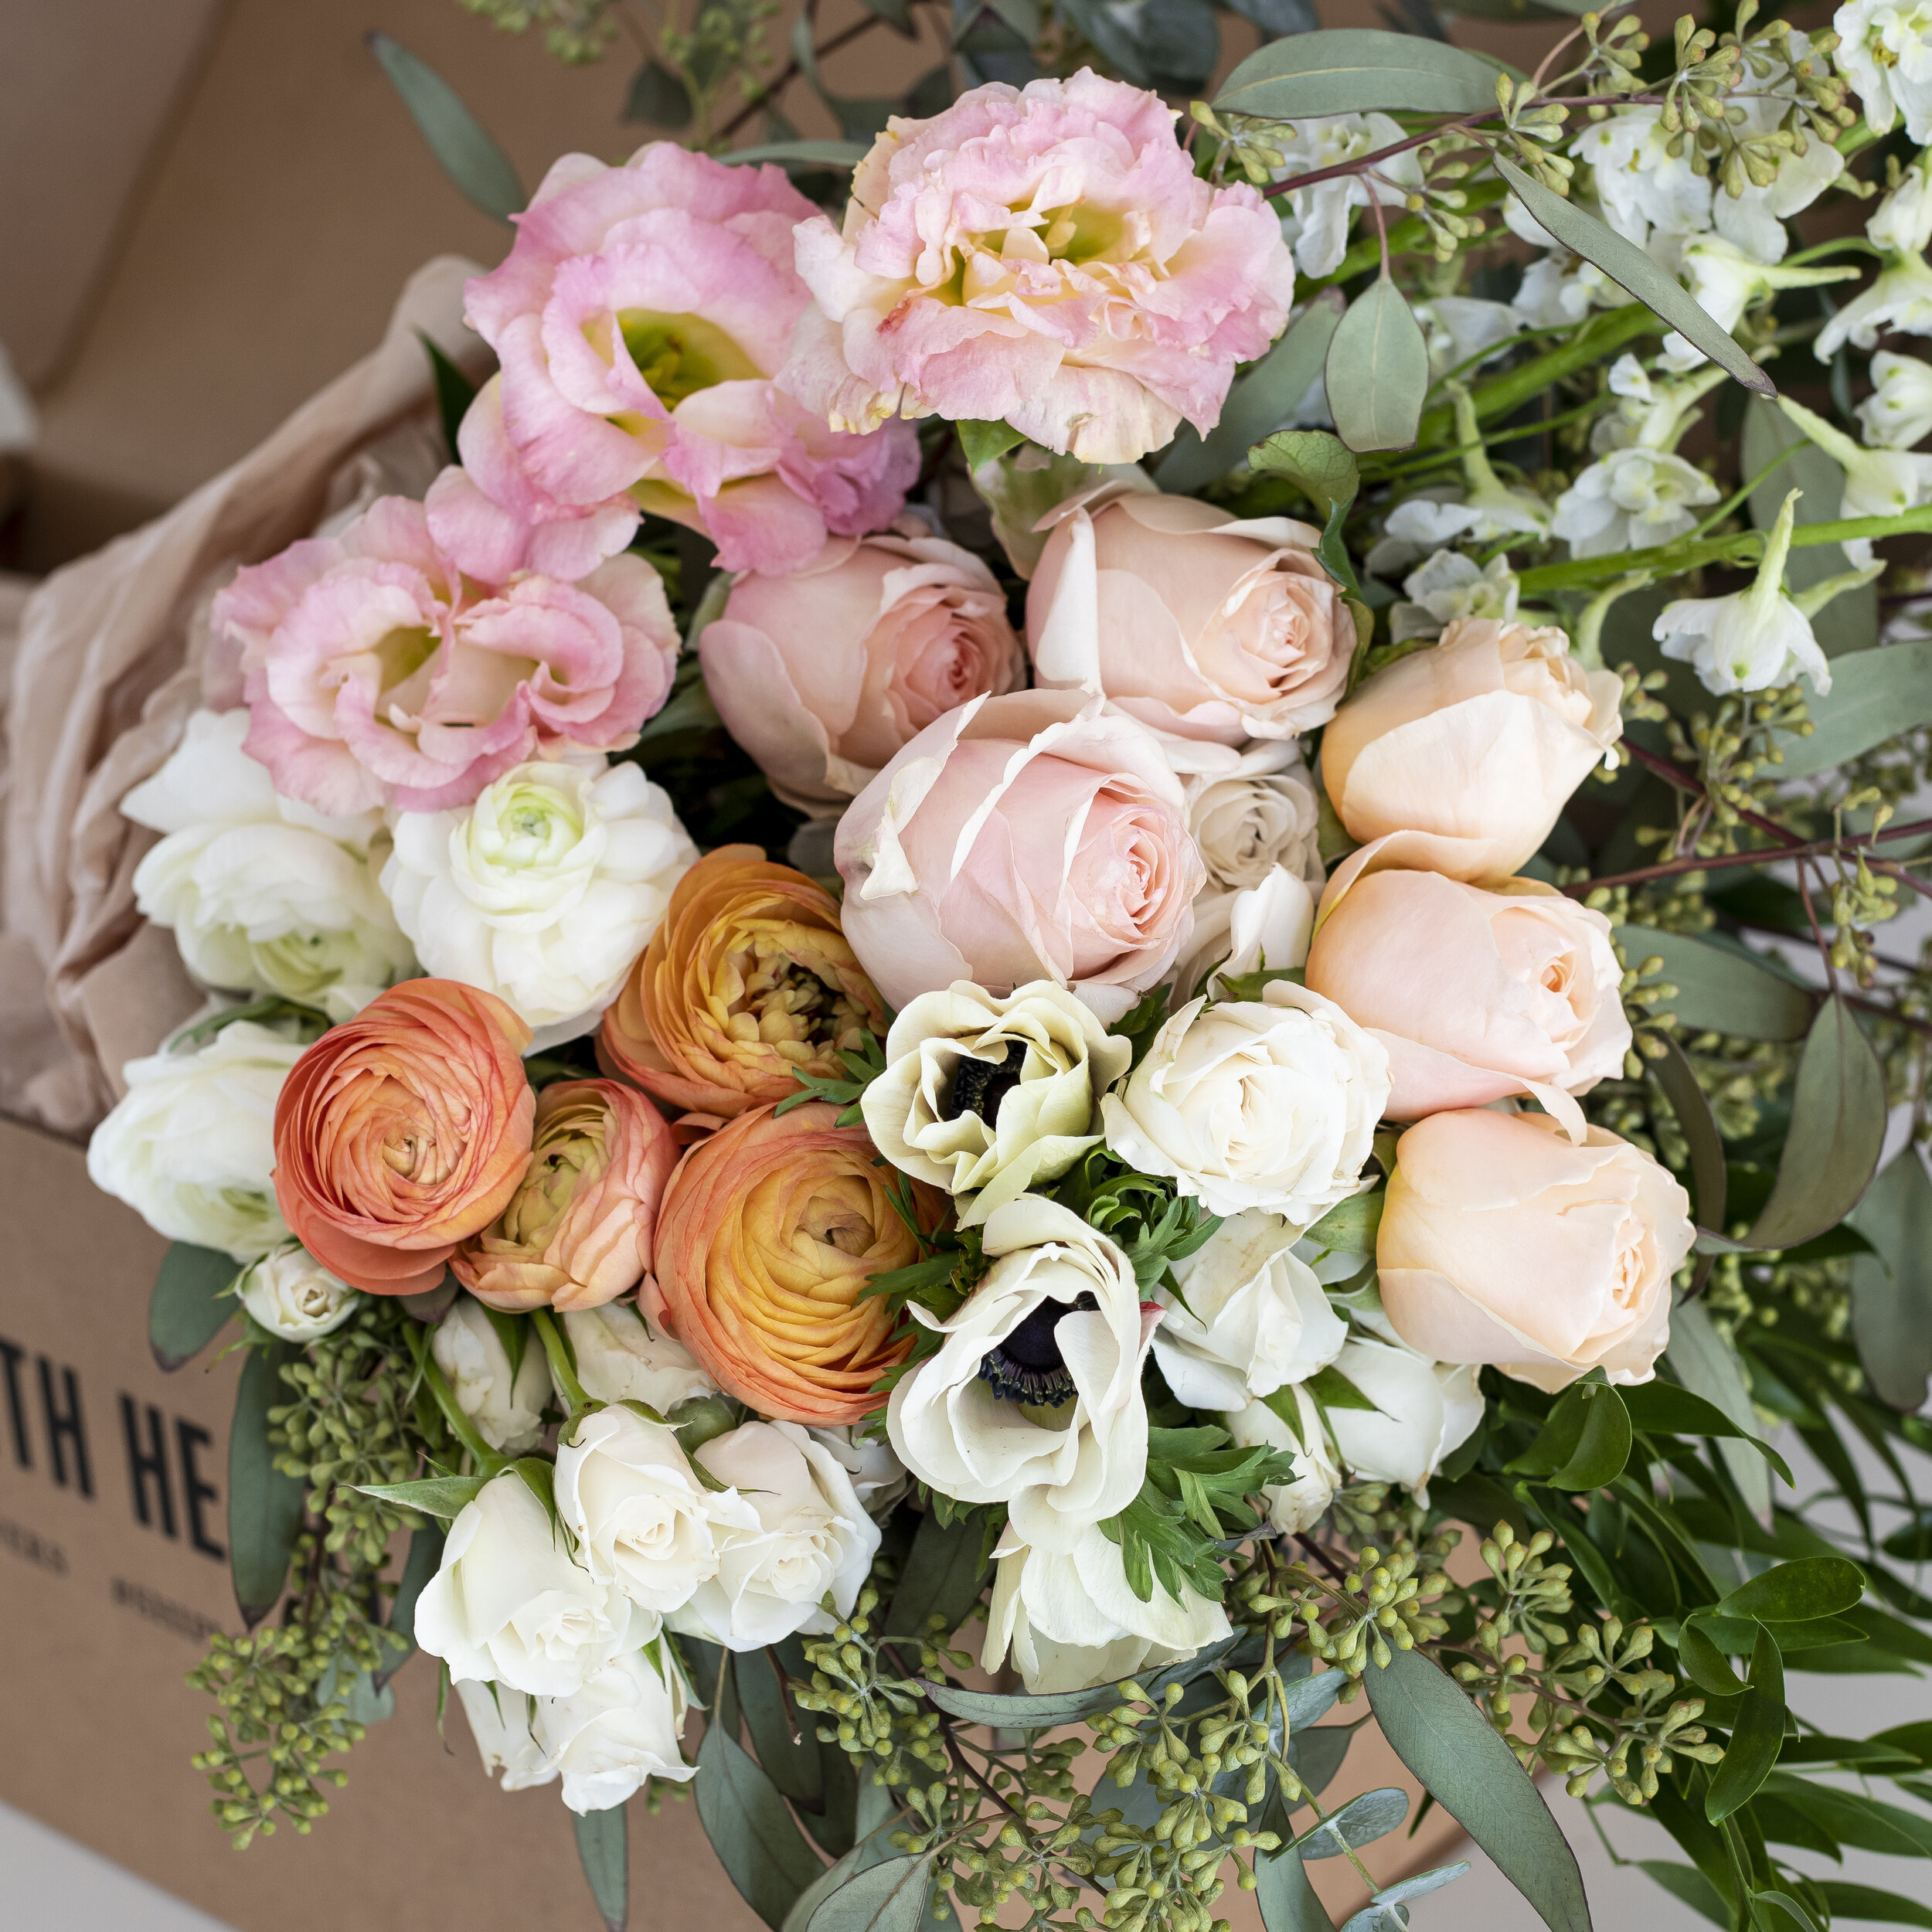 A bouquet of mixed white, pink, and orange flowers wrapped in burlap, sitting in a cardboard box